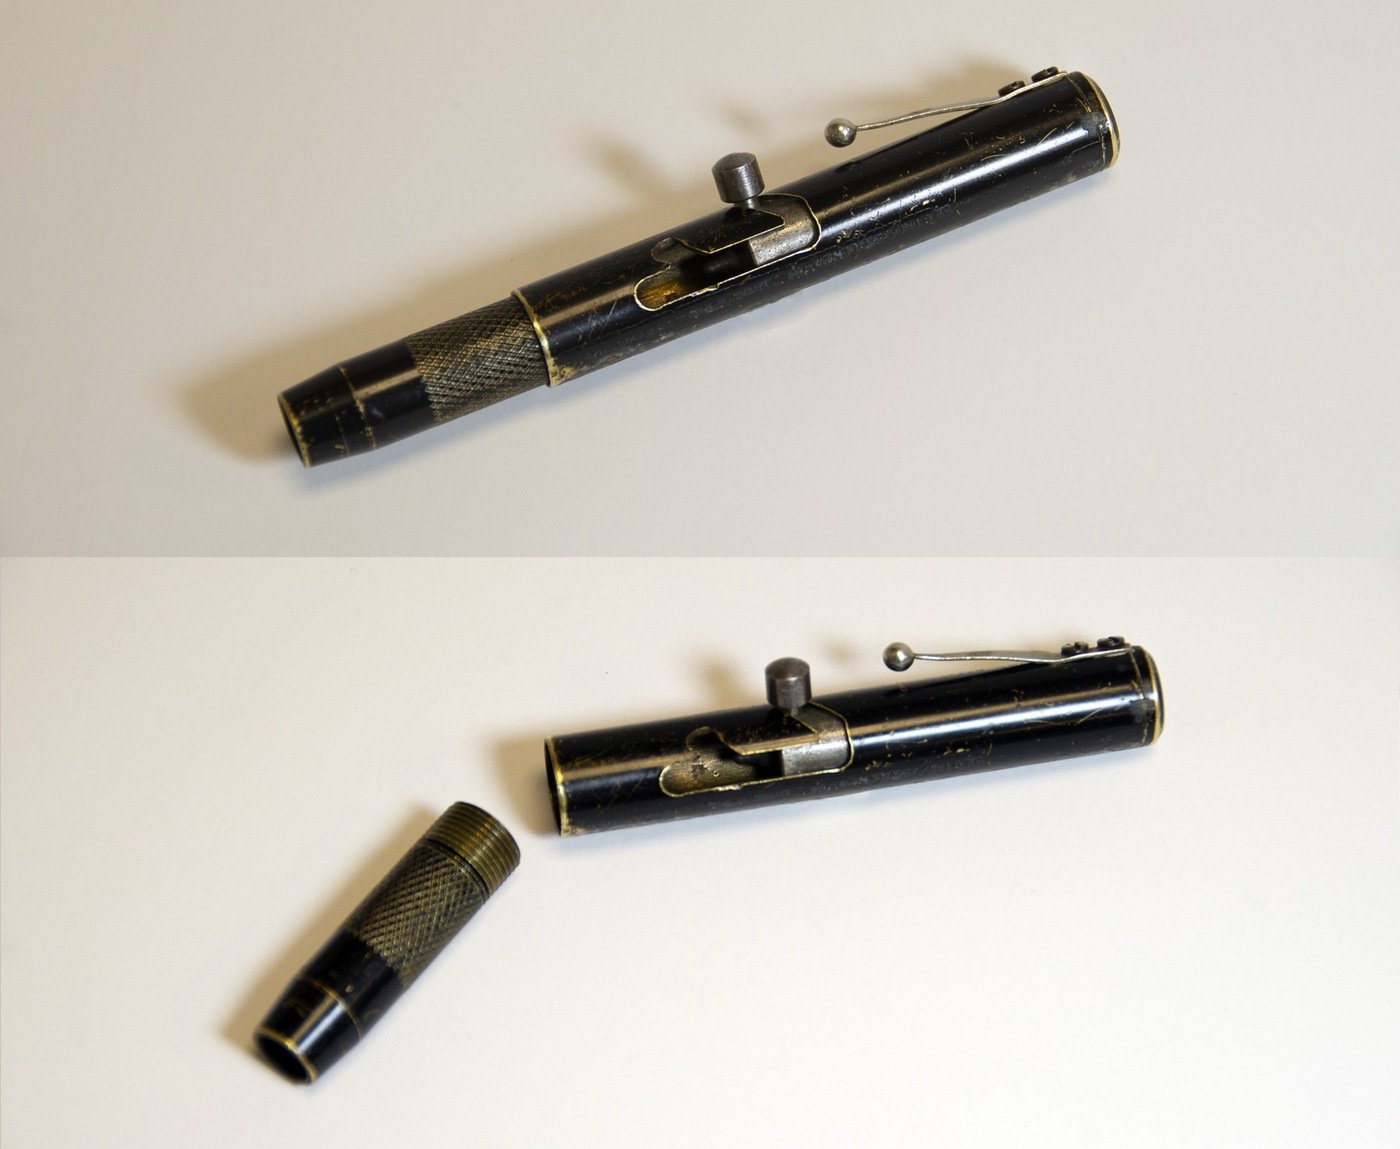 Photo of two pen guns. Pen guns are dangerous weapons designed to look like ink pens.